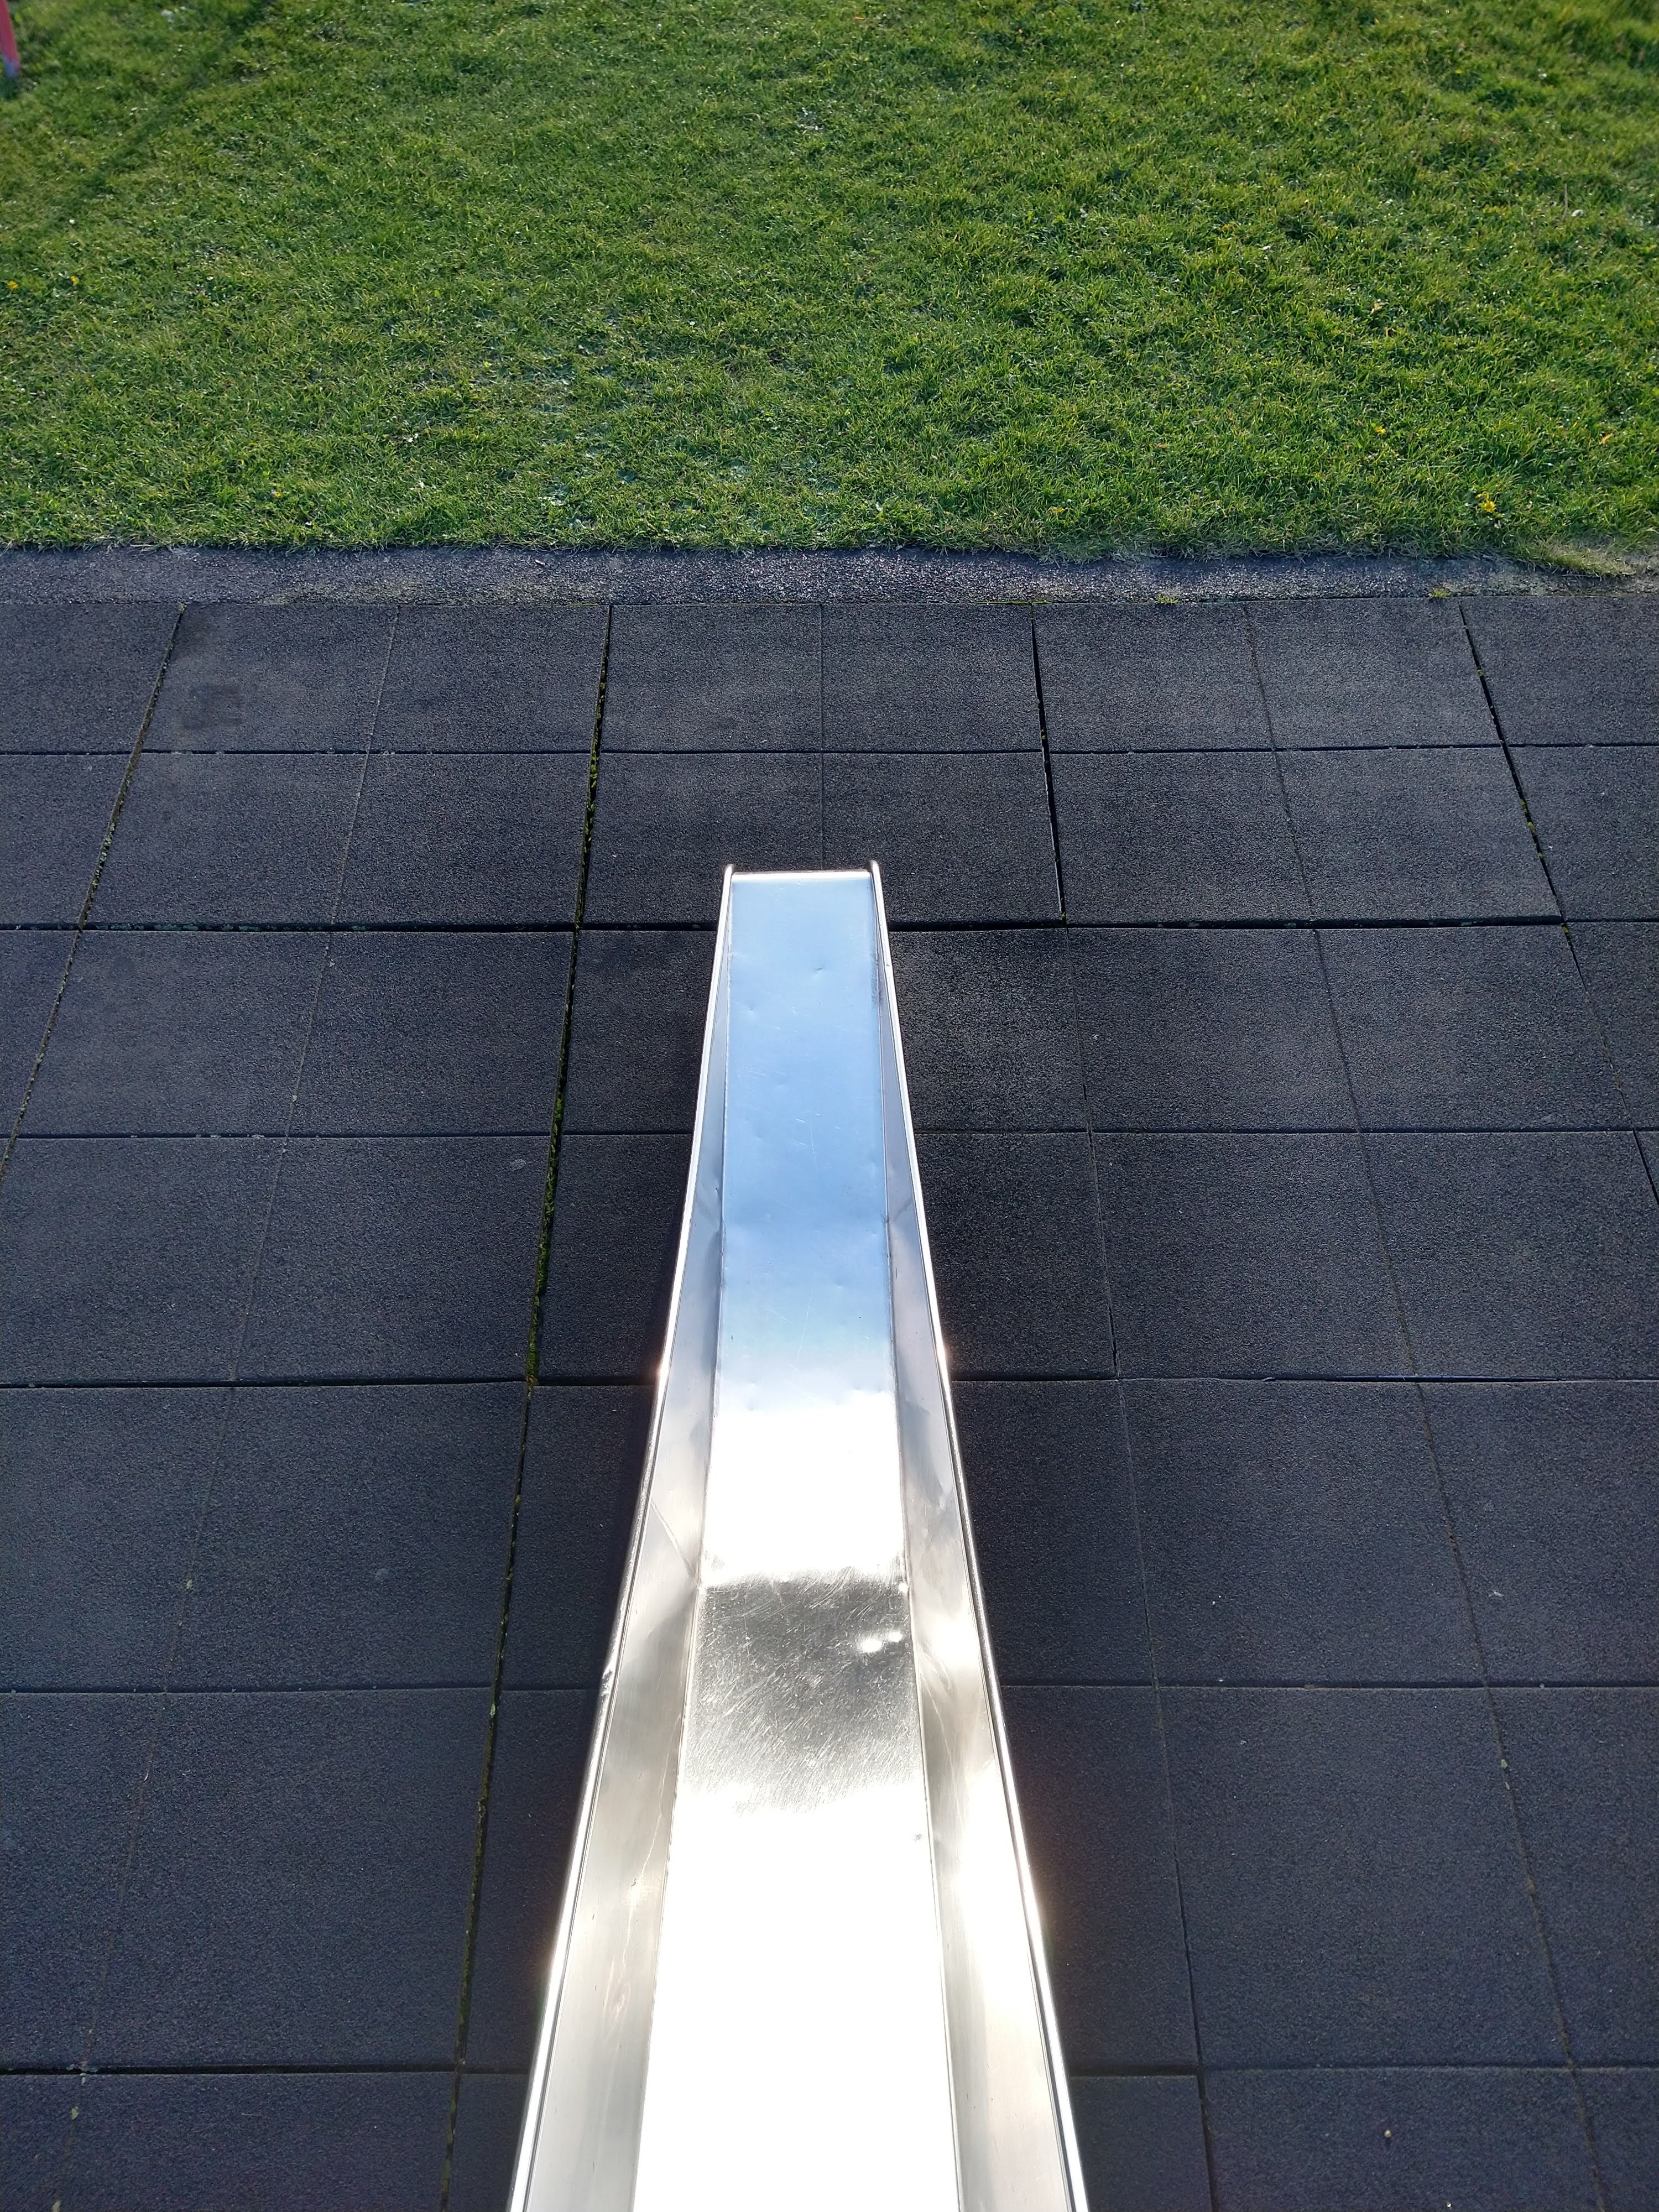 A picture of a silver slide in the middle on black rubber floor with green grass at the top of the screen